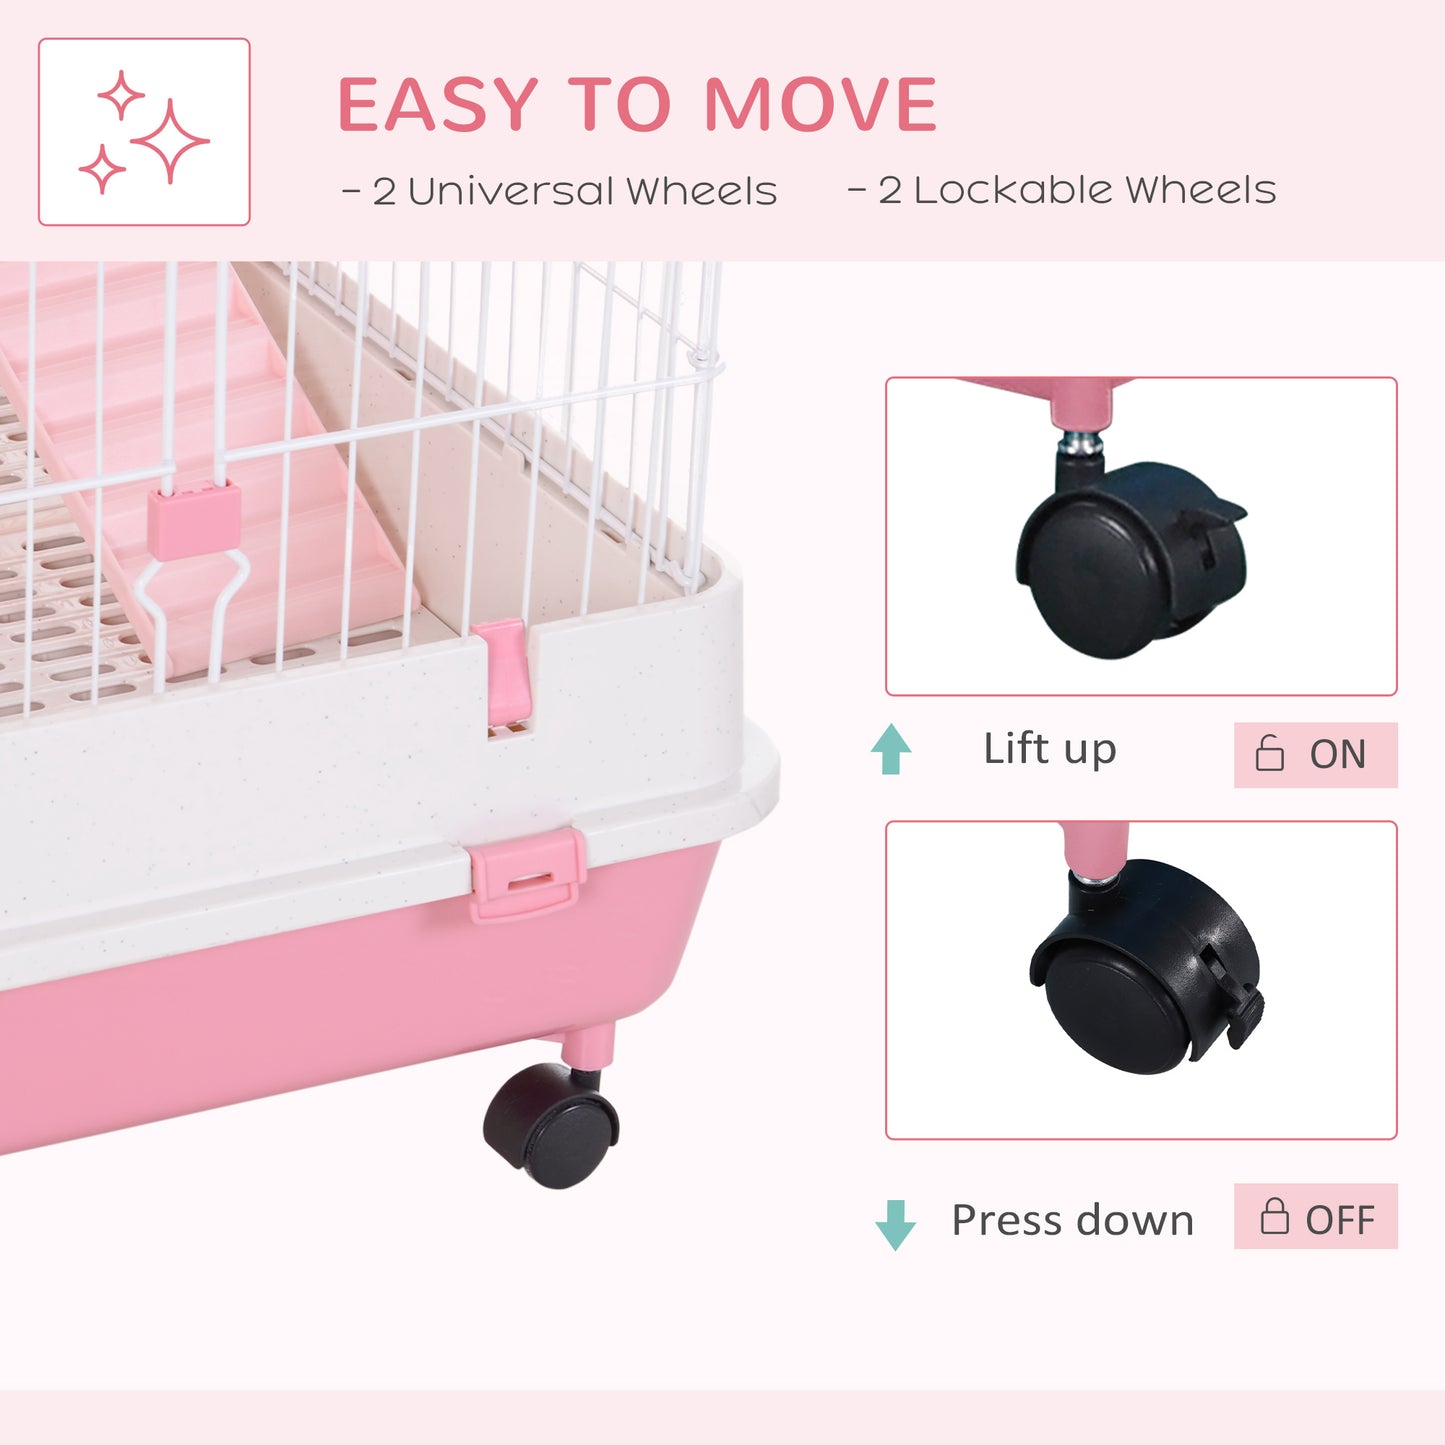 PawHut 6 Levels Small Animal Cage Indoor Bunny House for Ferret Chinchilla with Wheels, Slide-out Tray, Pink